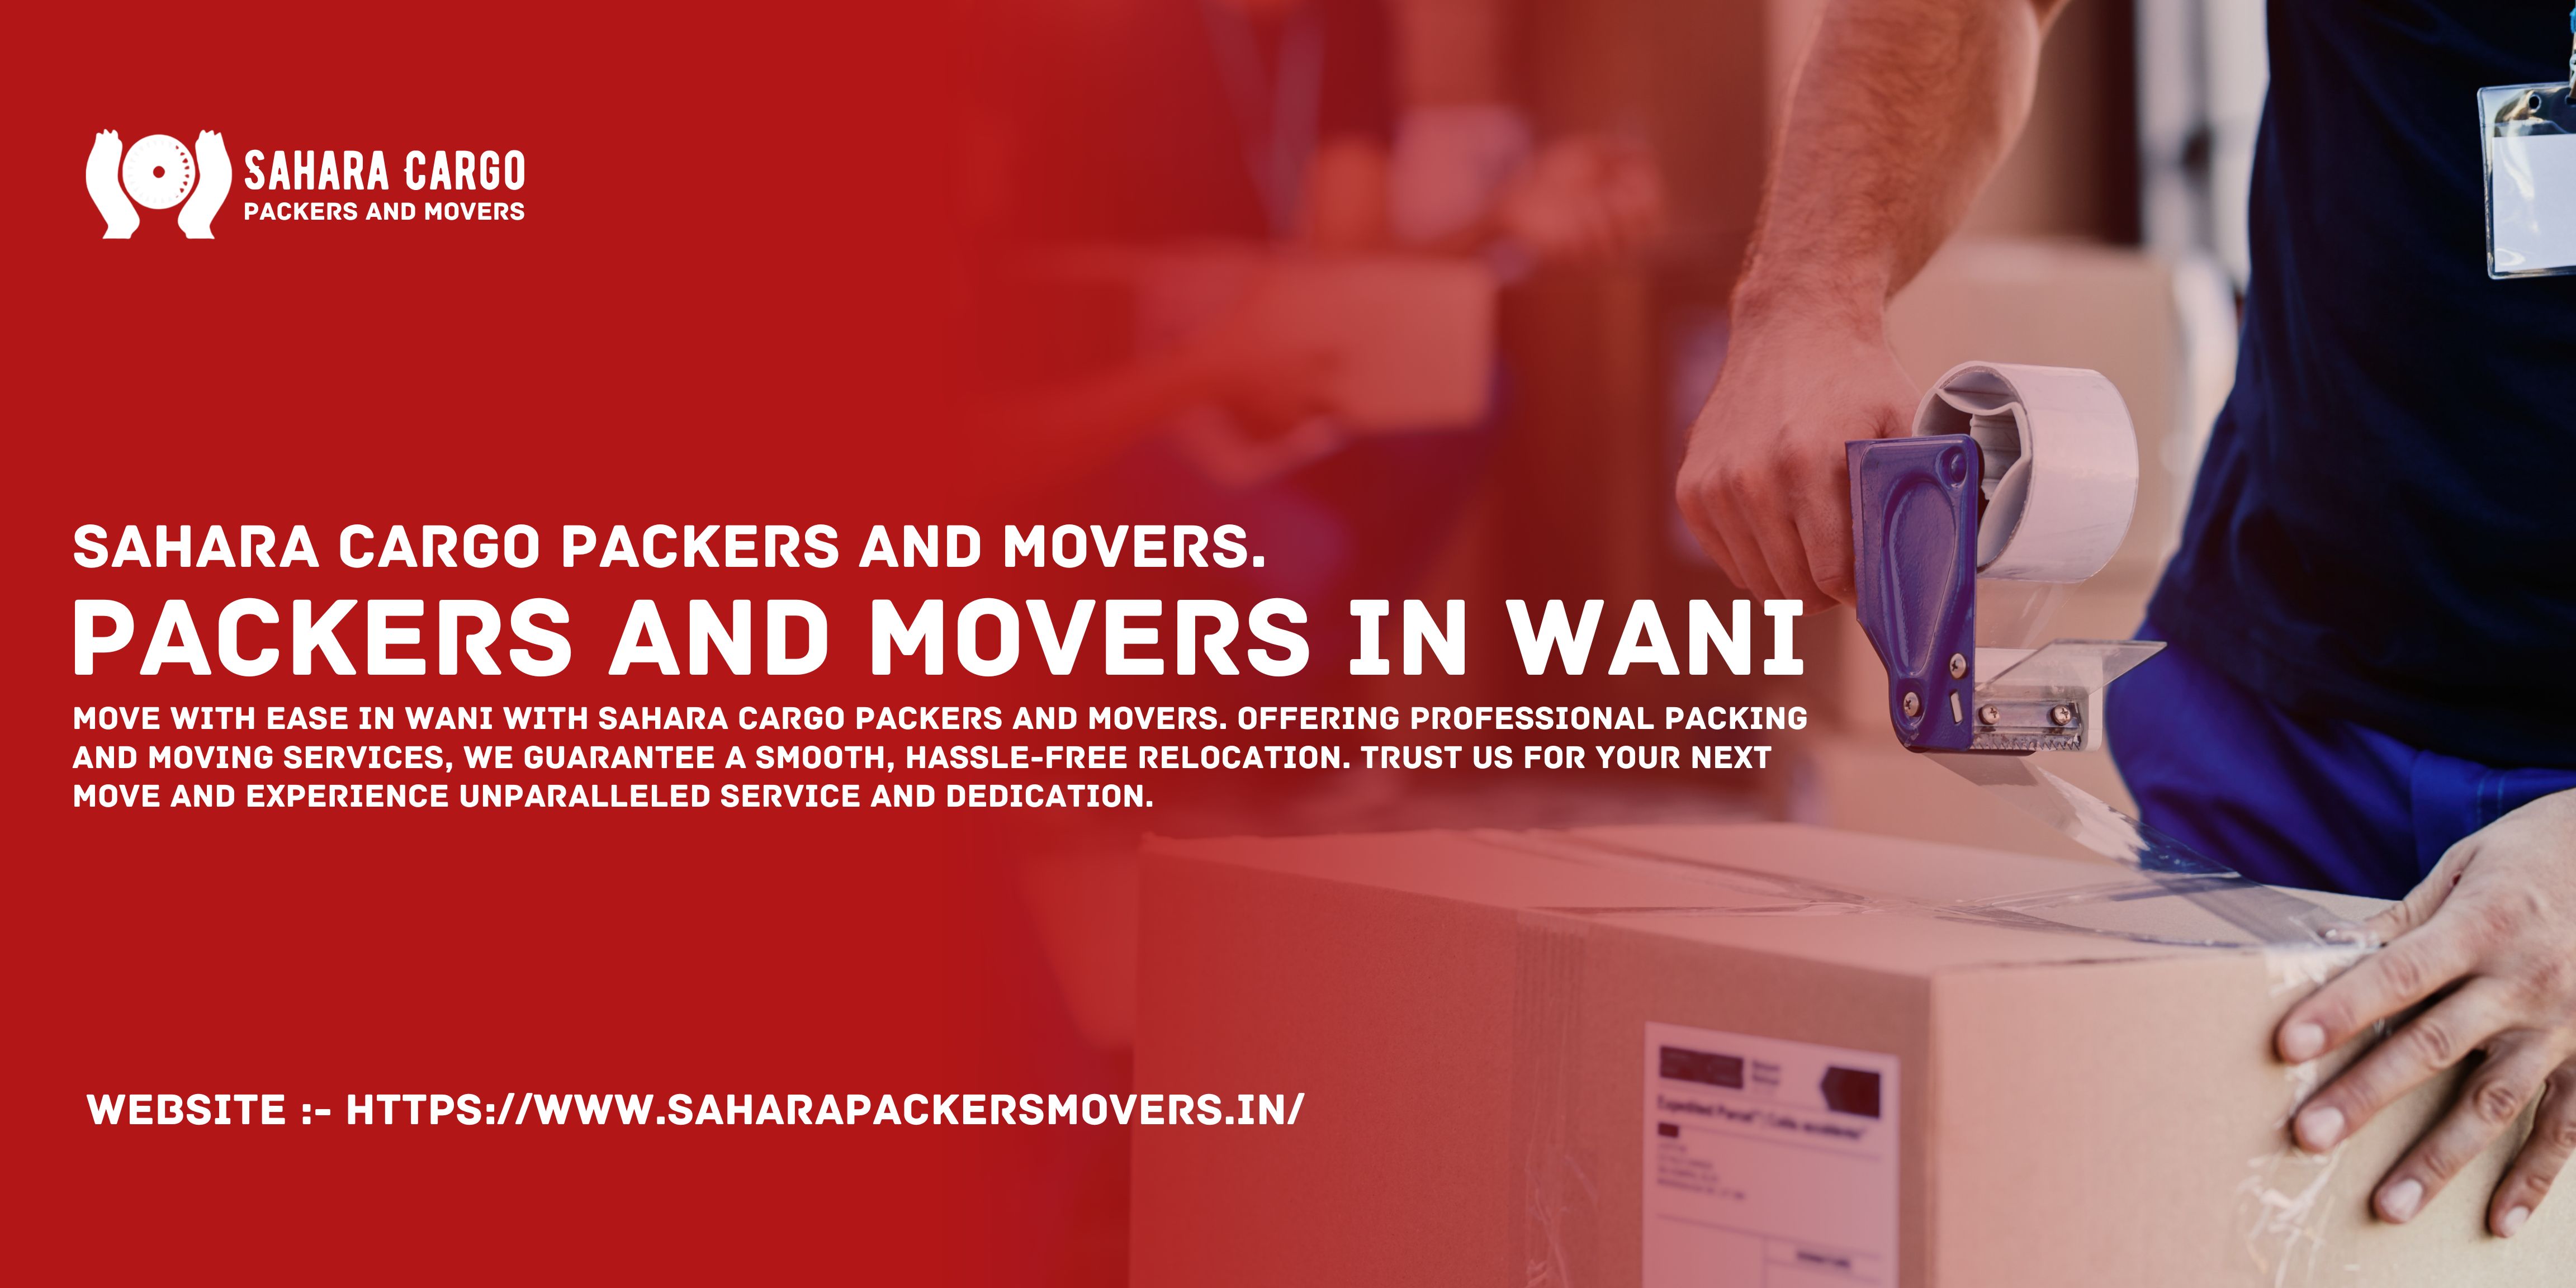 Packers and Movers in Wani